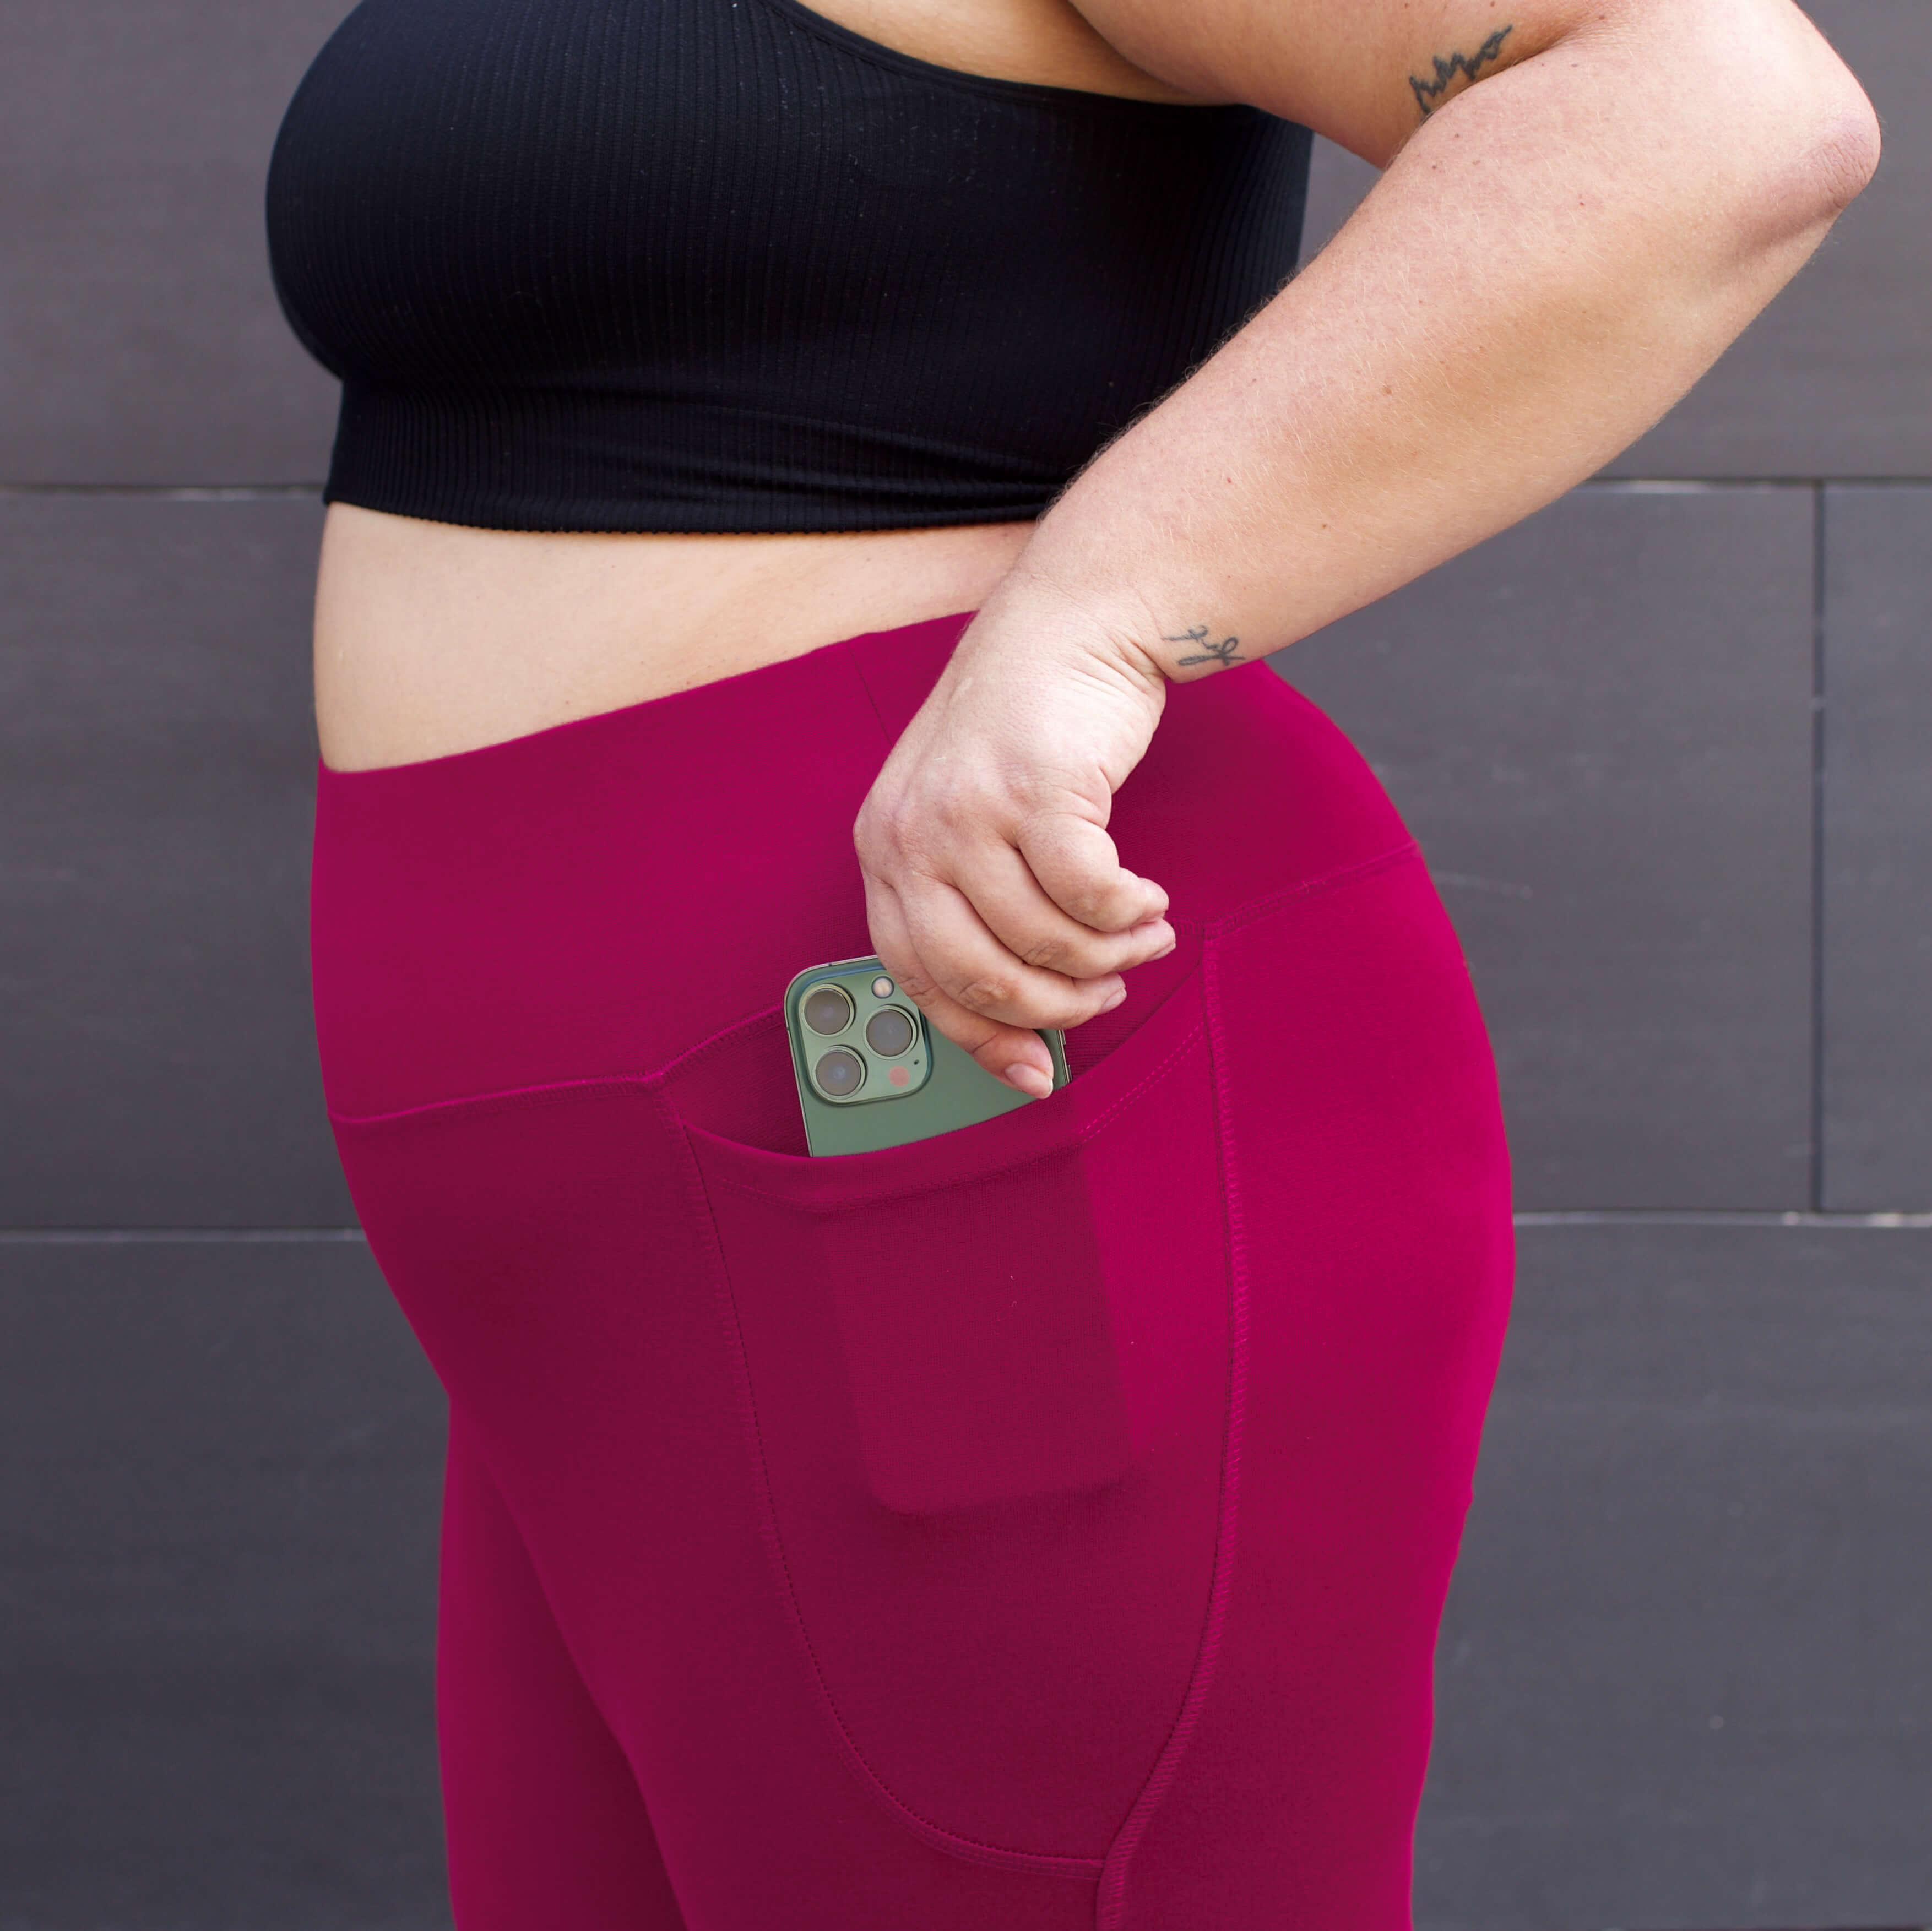 FABLETICS, CURVY GIRL REVIEW